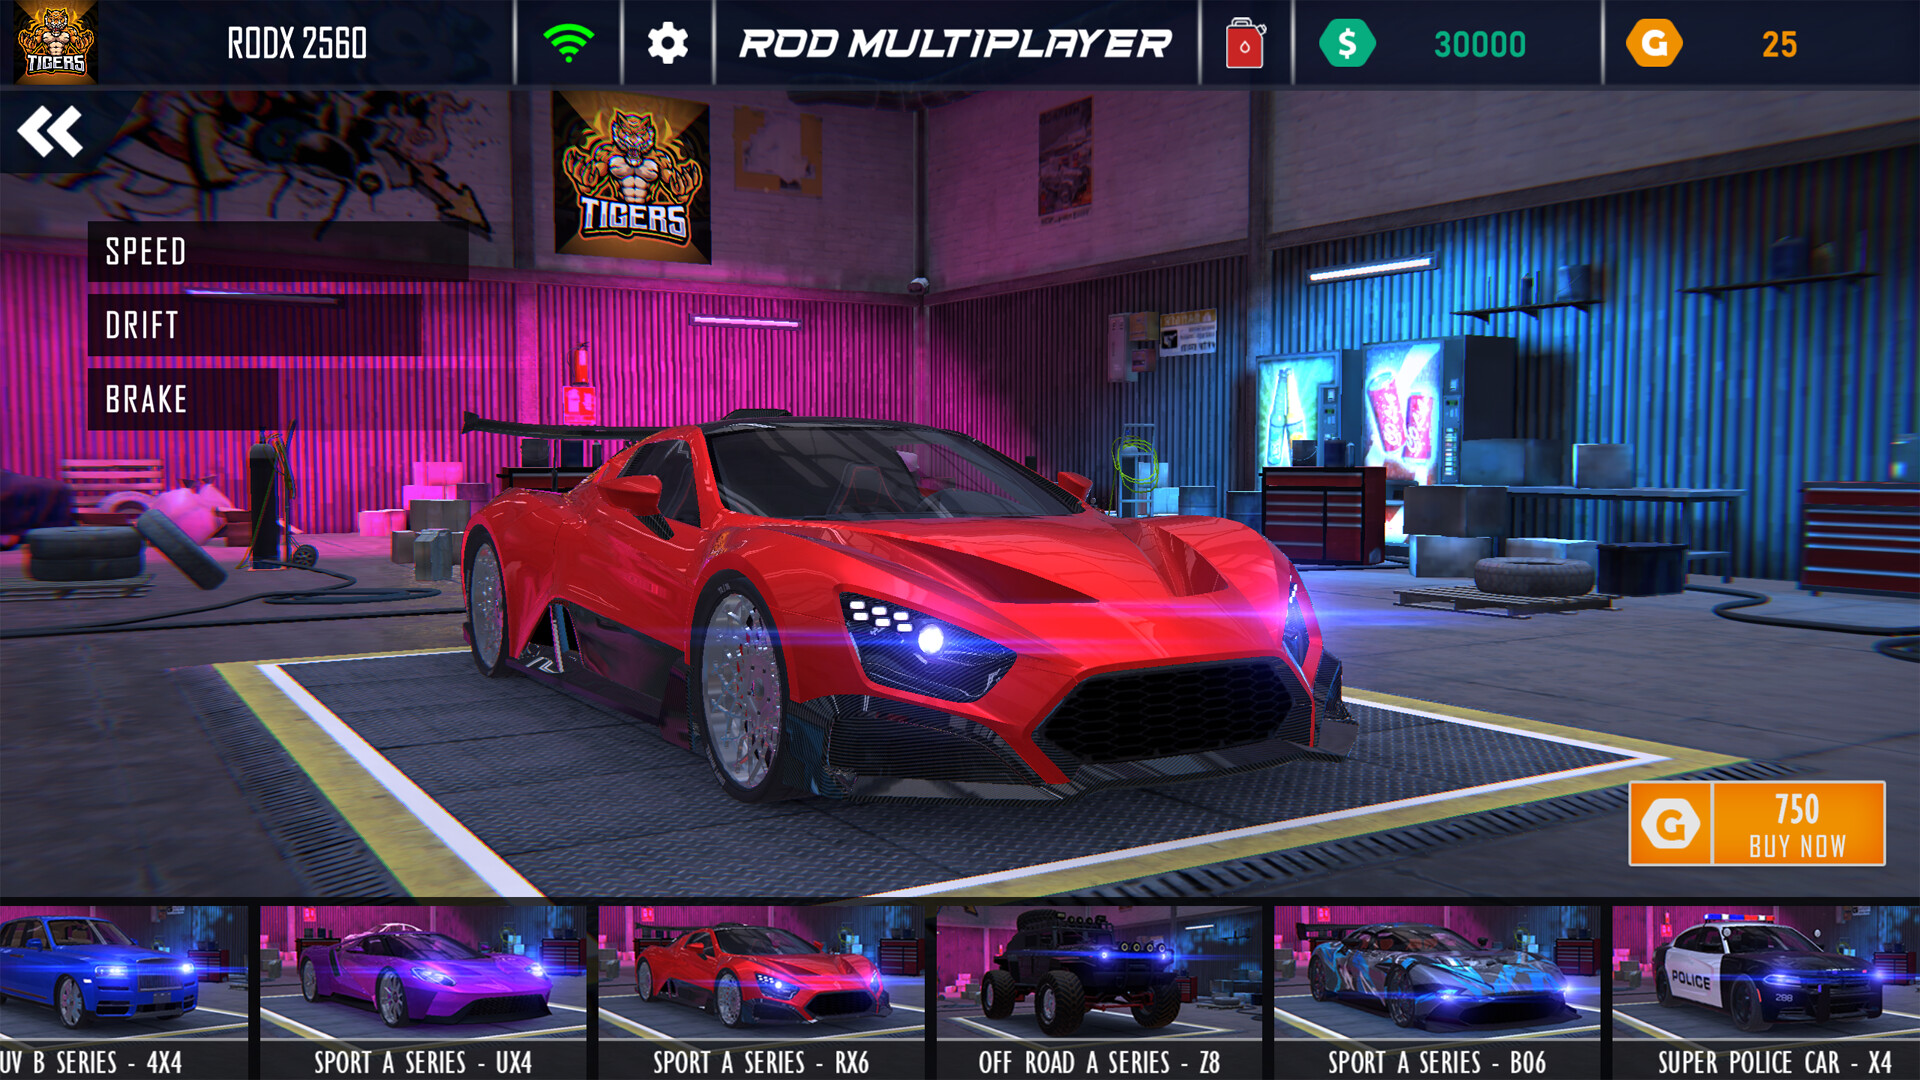 Rod Multiplayer car Driving. Drag games for PC. Drive car multiplayer